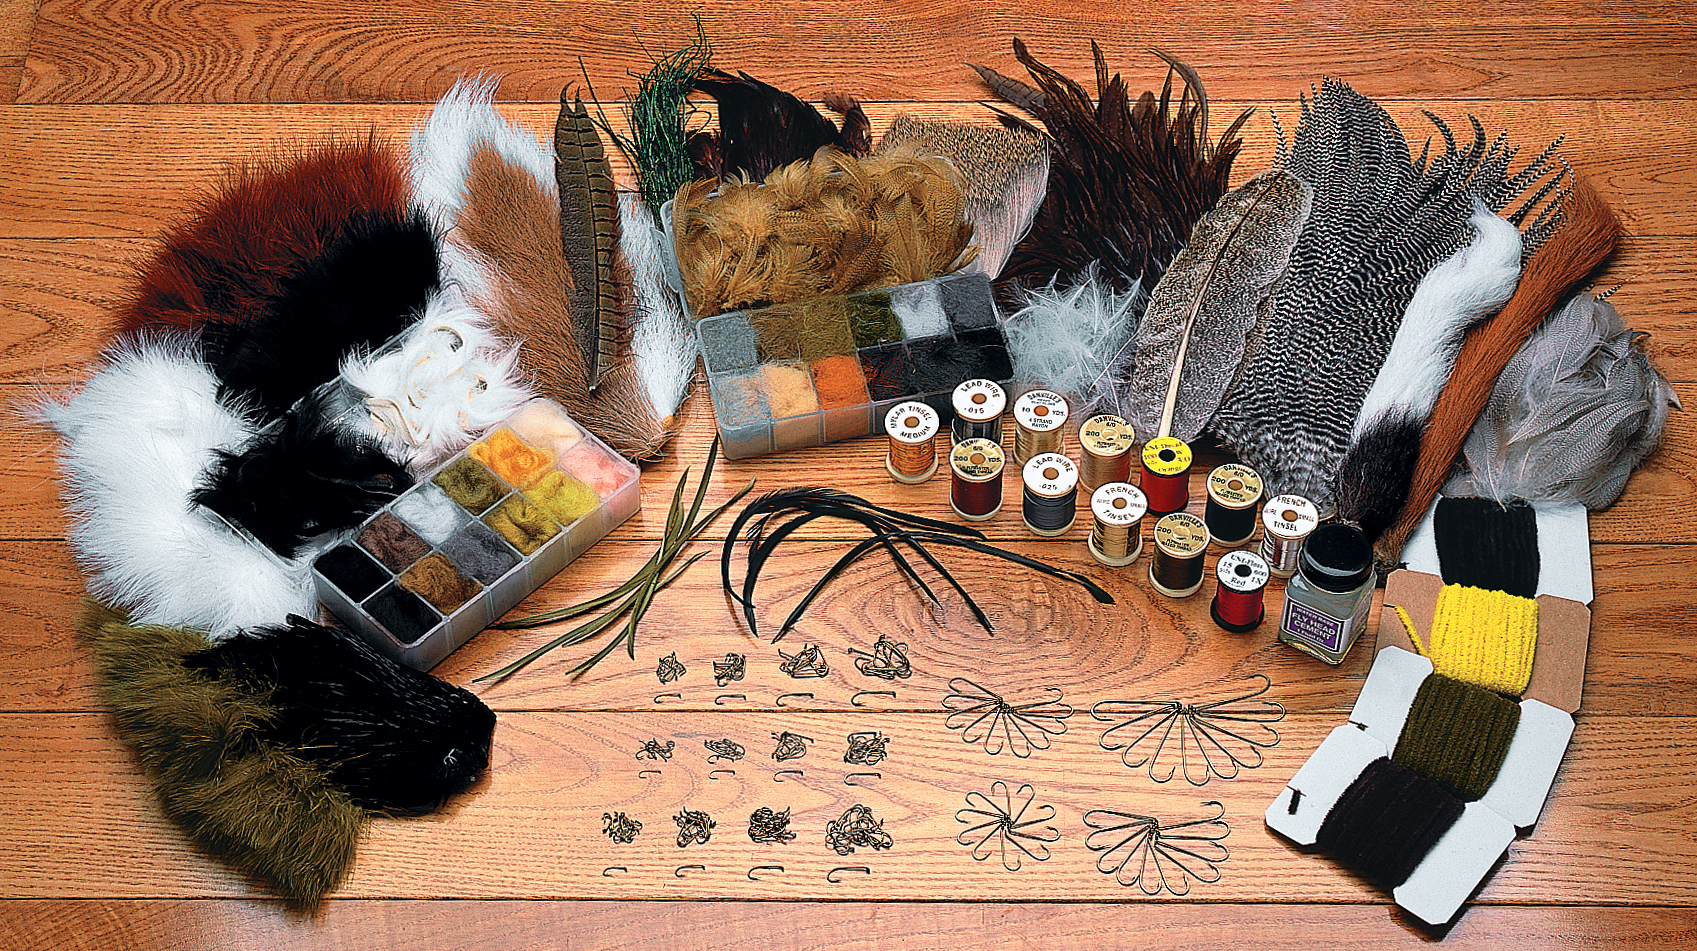 X-select Dubbing Deer Ear Natural Fly Tying Materials 